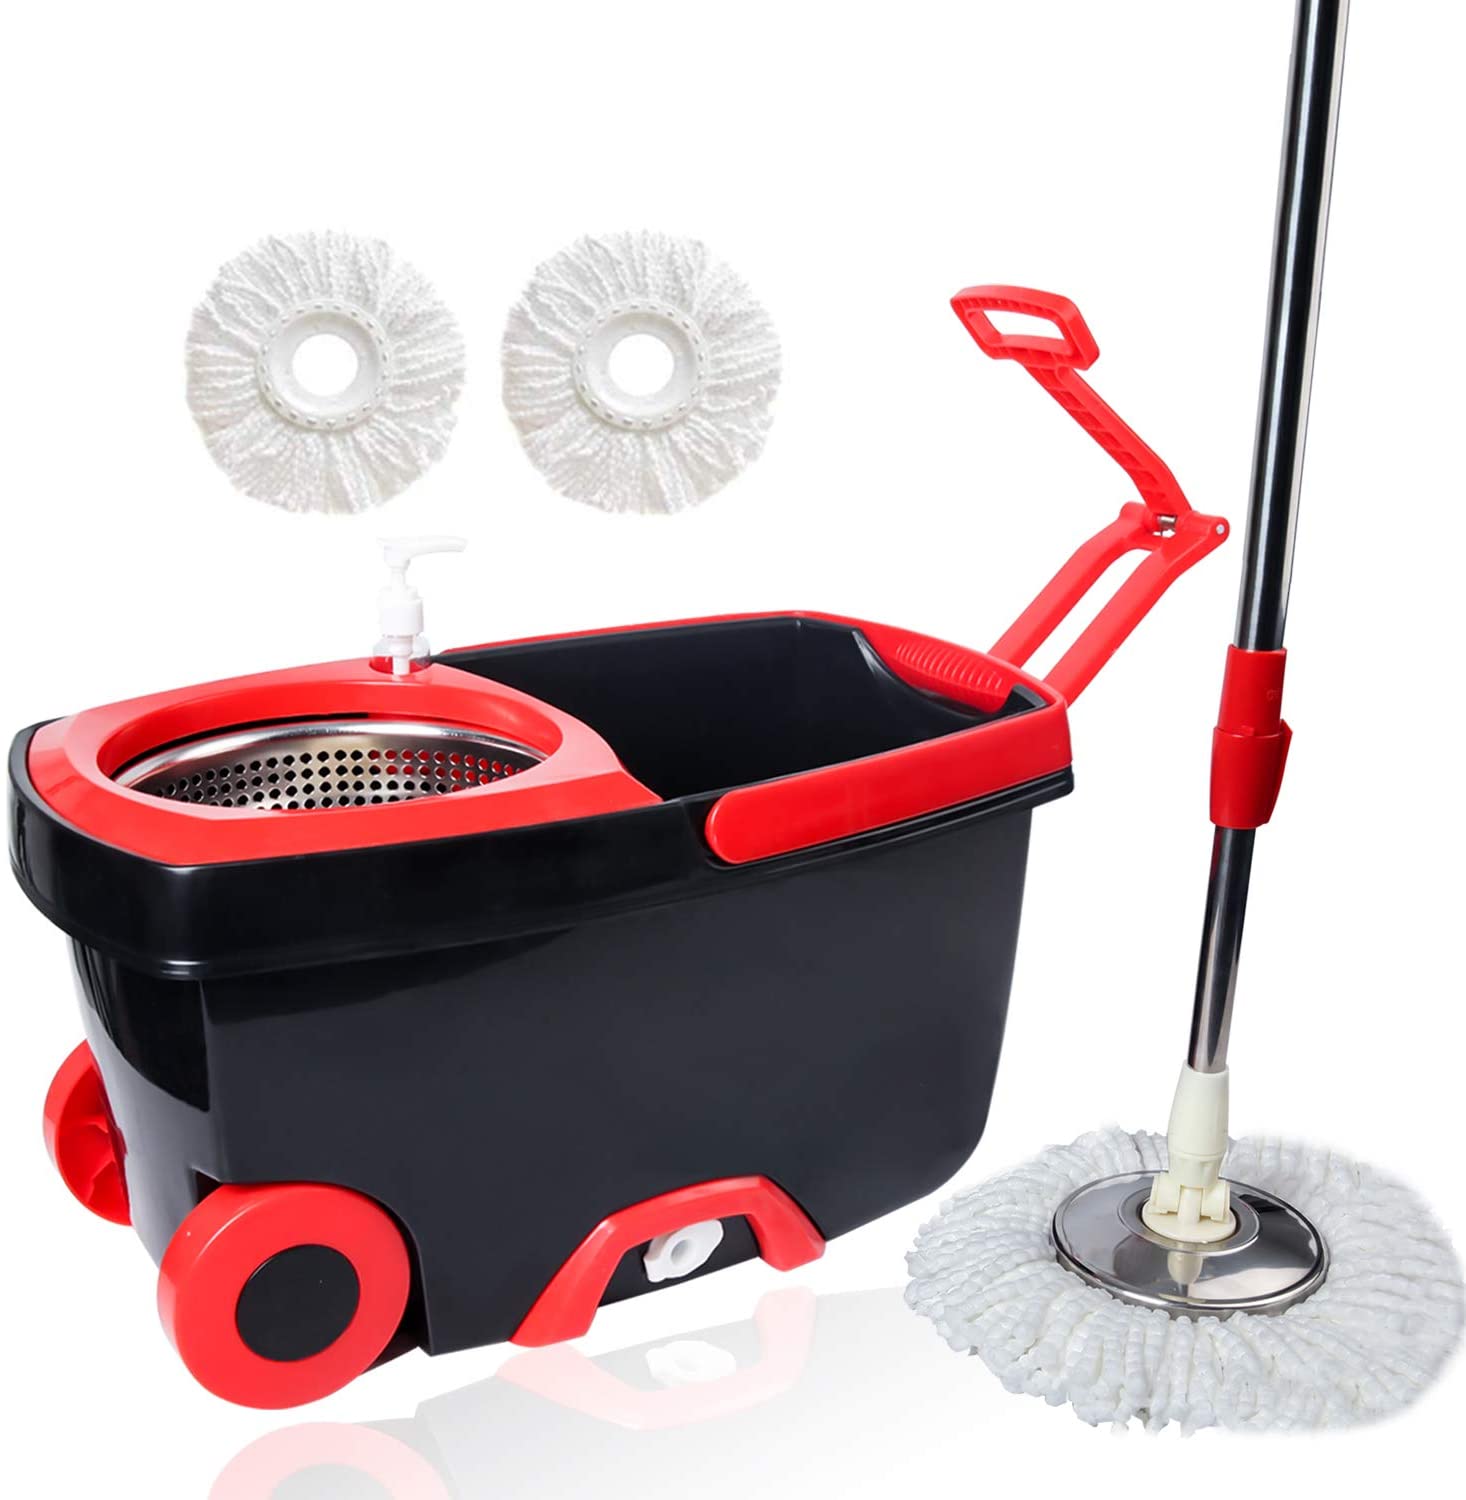 Top 10 Best Spin Mops in 2020 Reviews Spinning Mop and Bucket